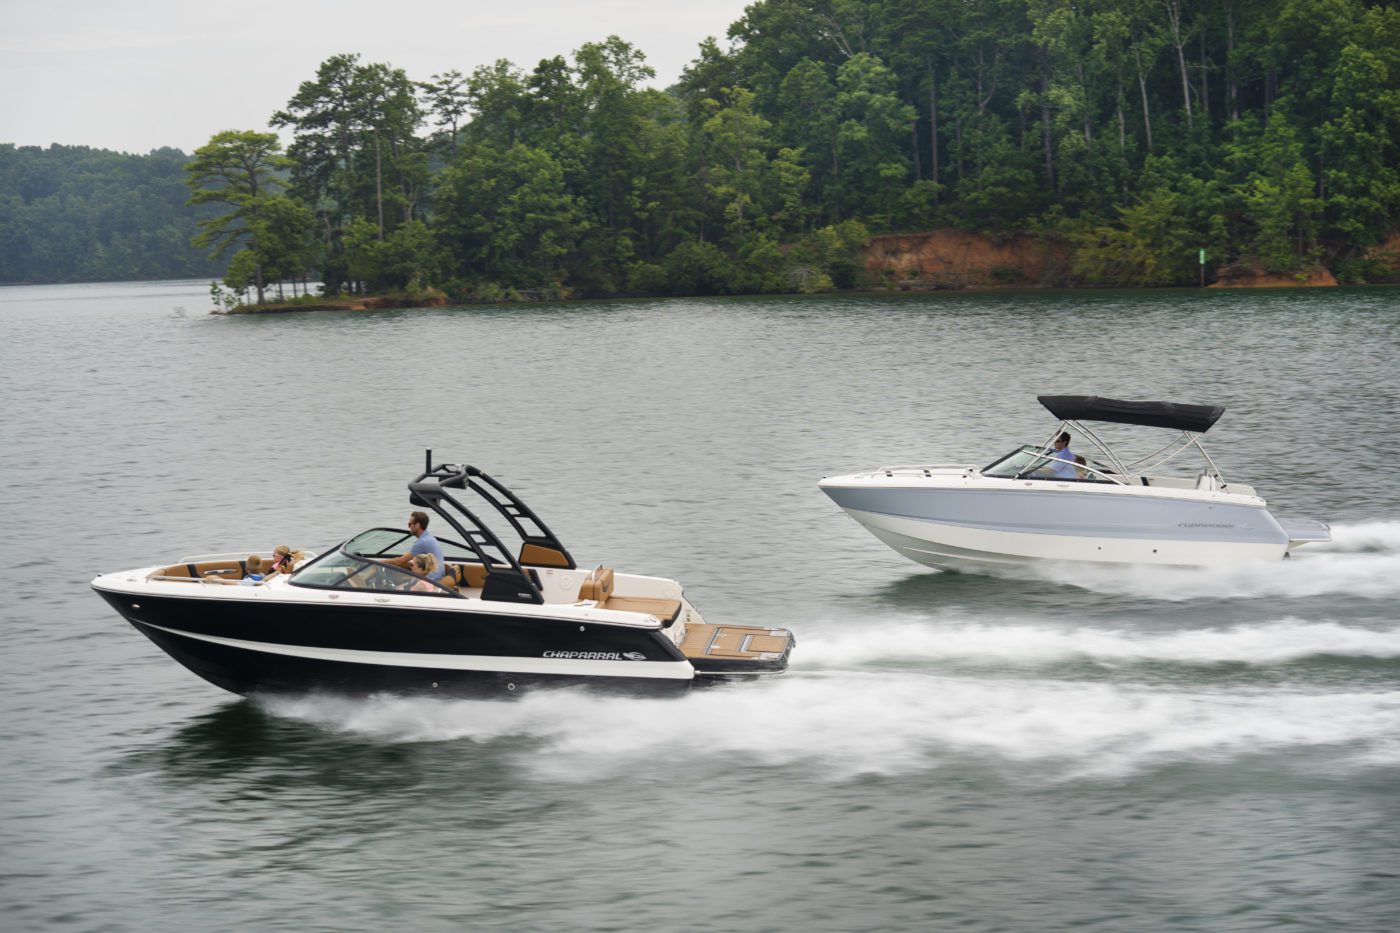 Two of the Chaparral 247 SSX's out on the water